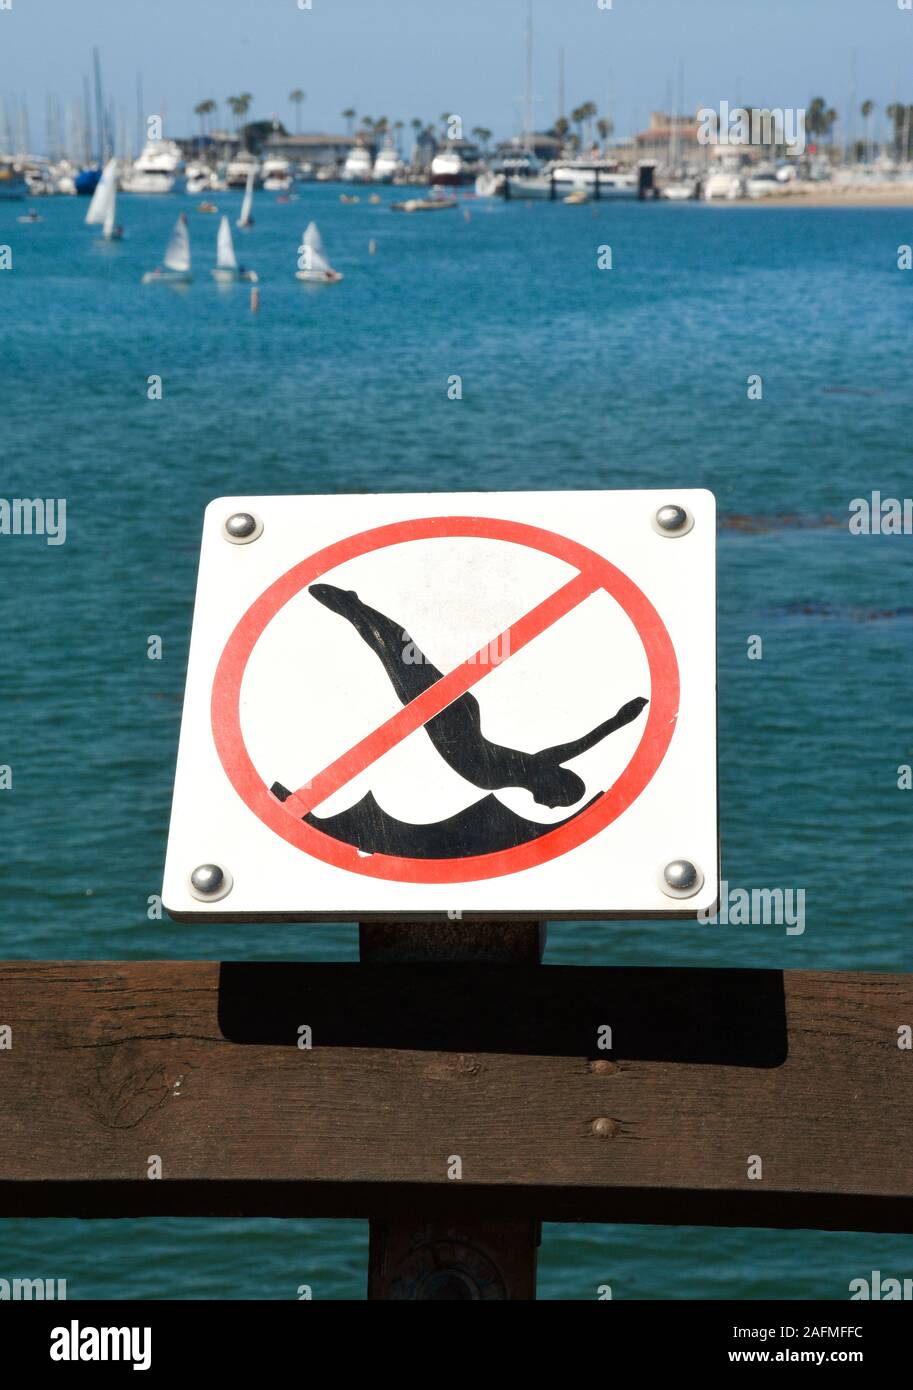 Graphic clip art type sign prohibiting  diving from the pier at Sterns Wharf at the harbor in Santa Barbara, CA, Stock Photo